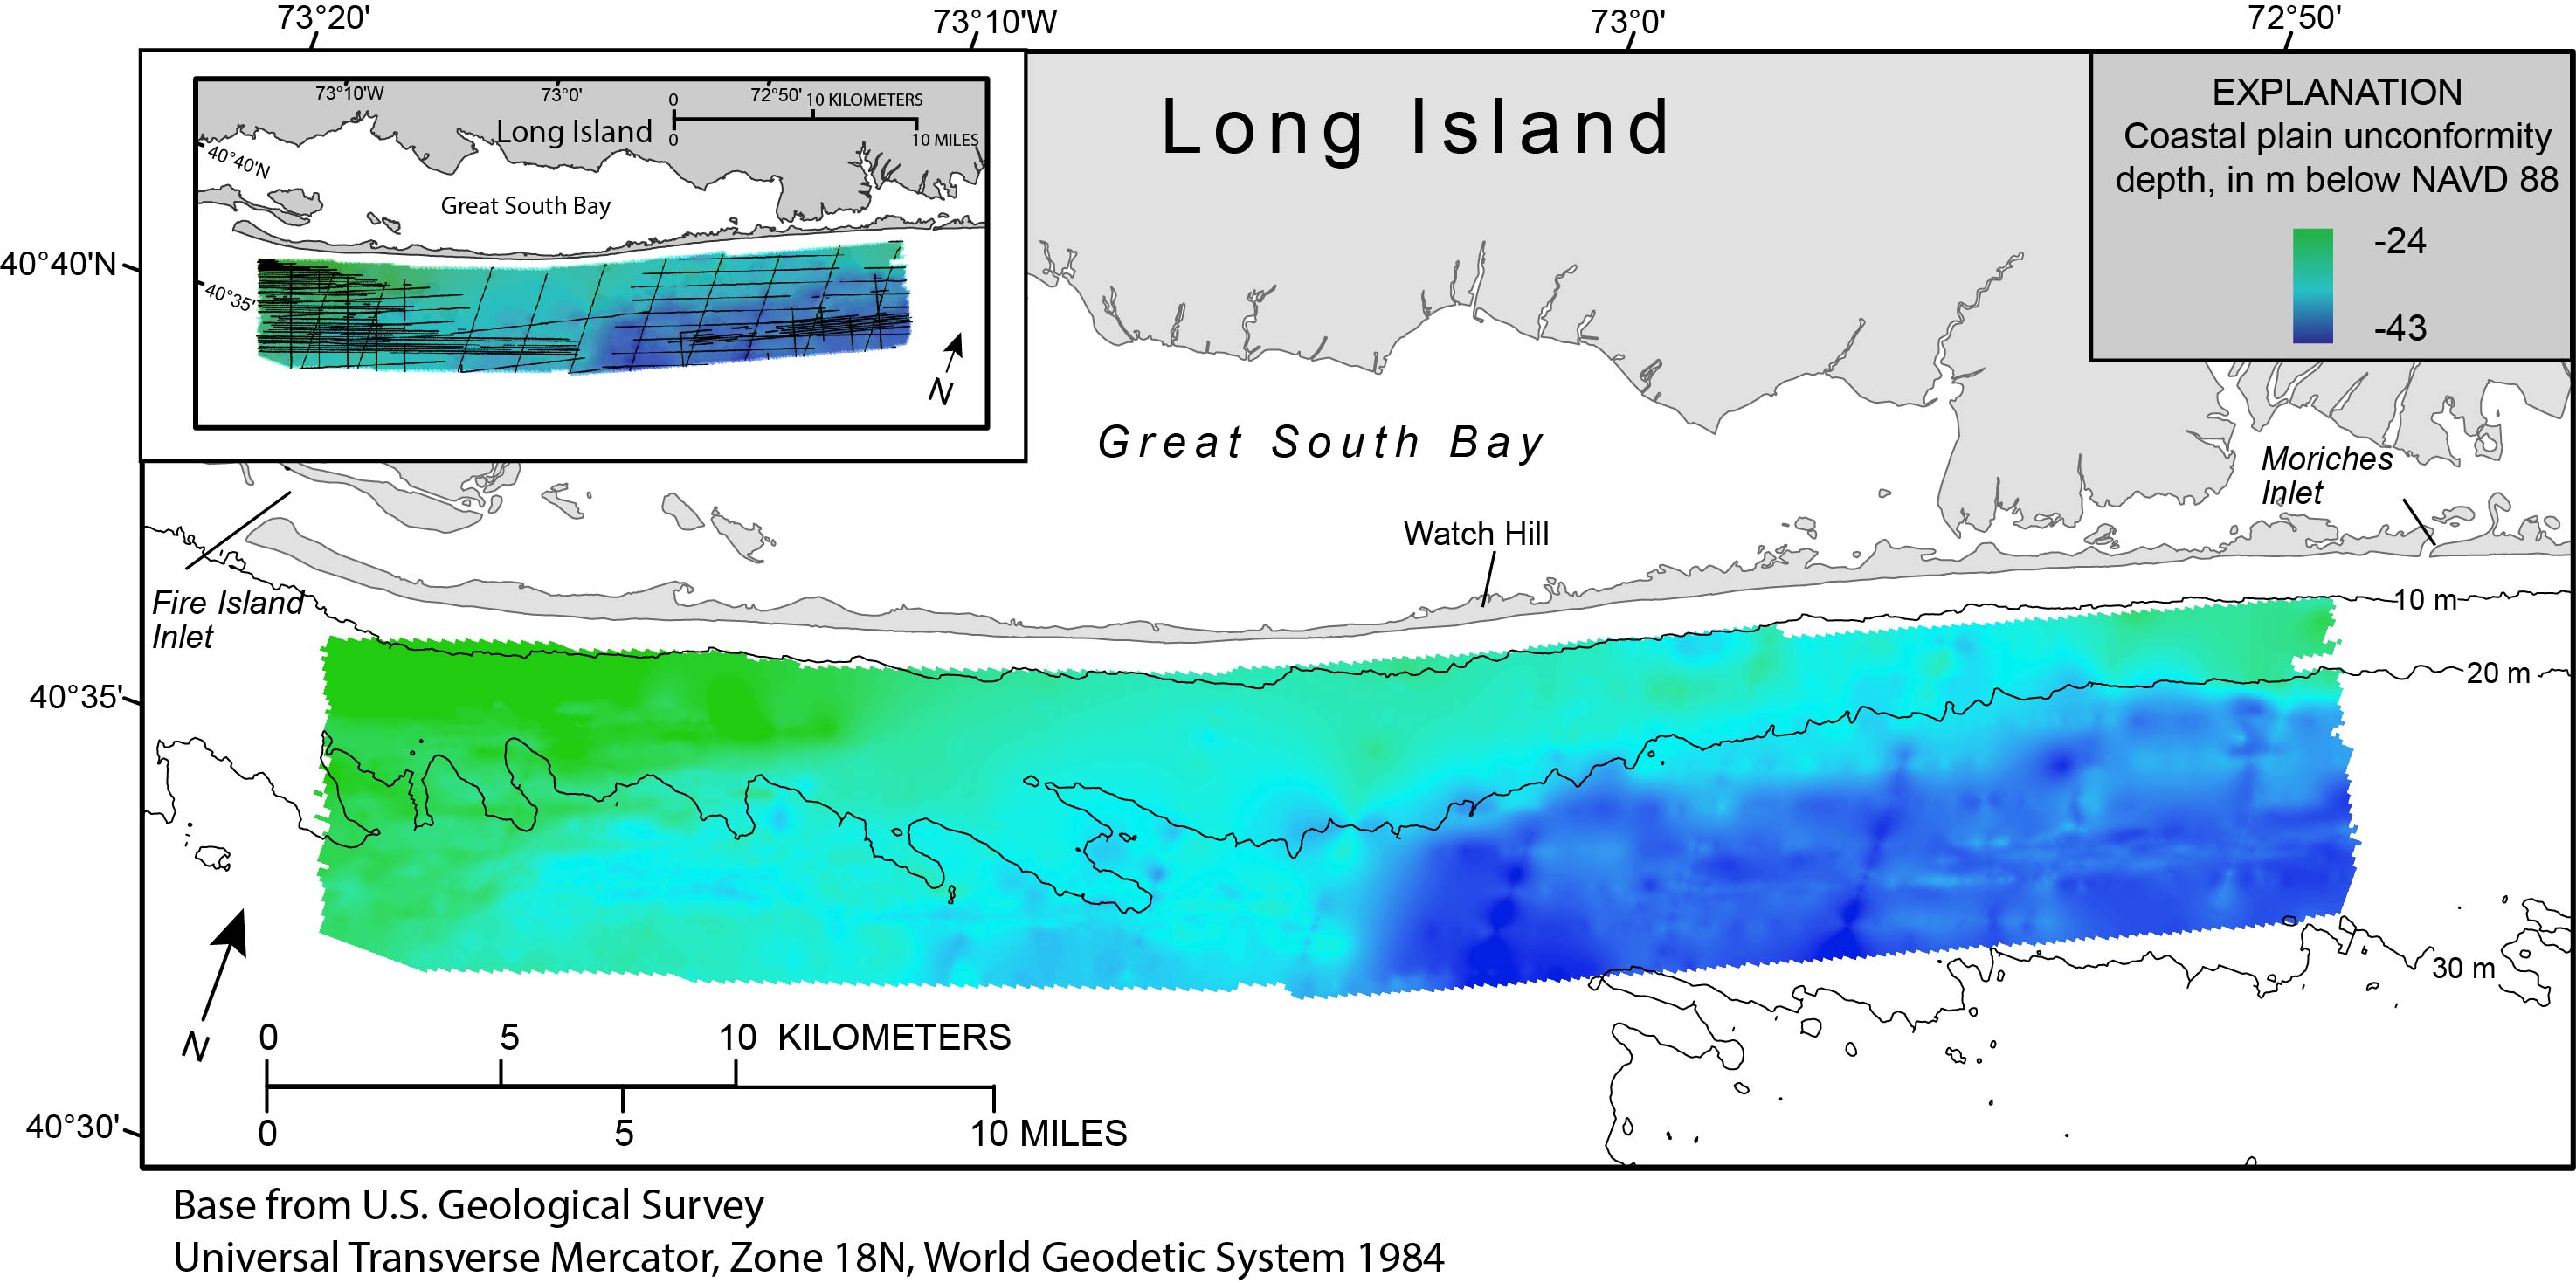 Map showing the coastal plain unconformity mapped offshore of Fire Island, New York.